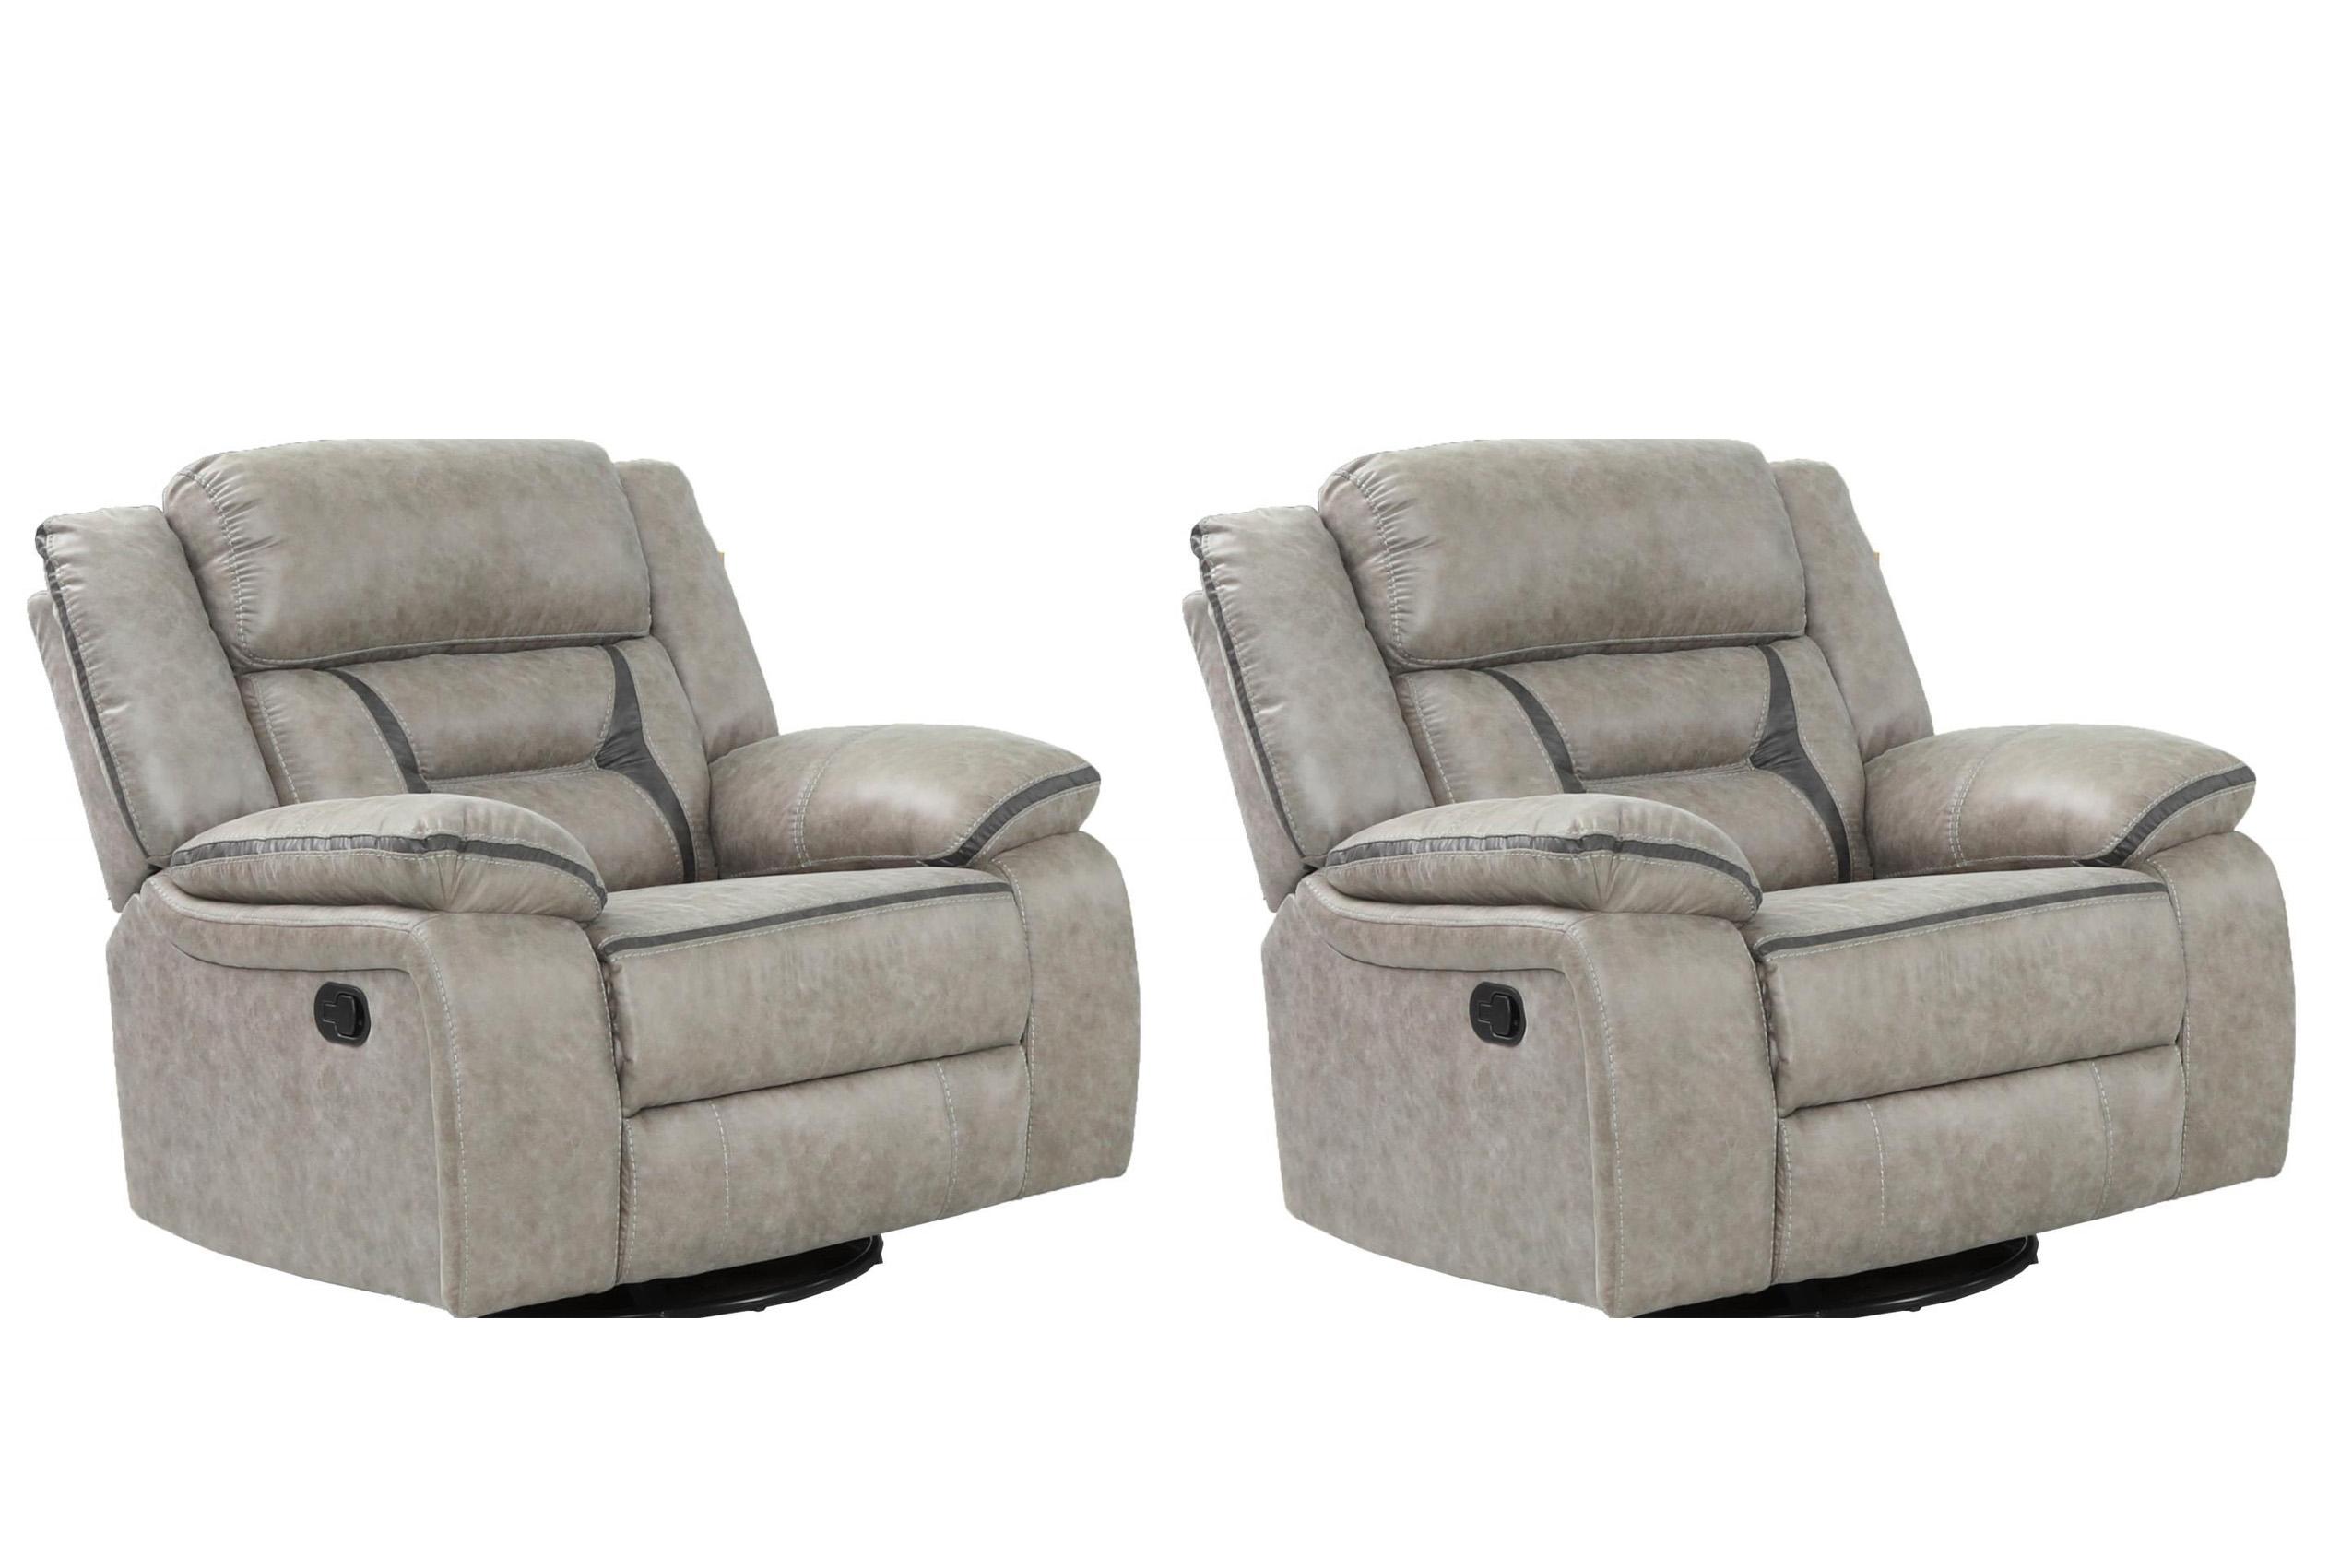 Contemporary, Modern Recliner Chair Set DENALI 698781291764-2PC in Gray Faux Leather